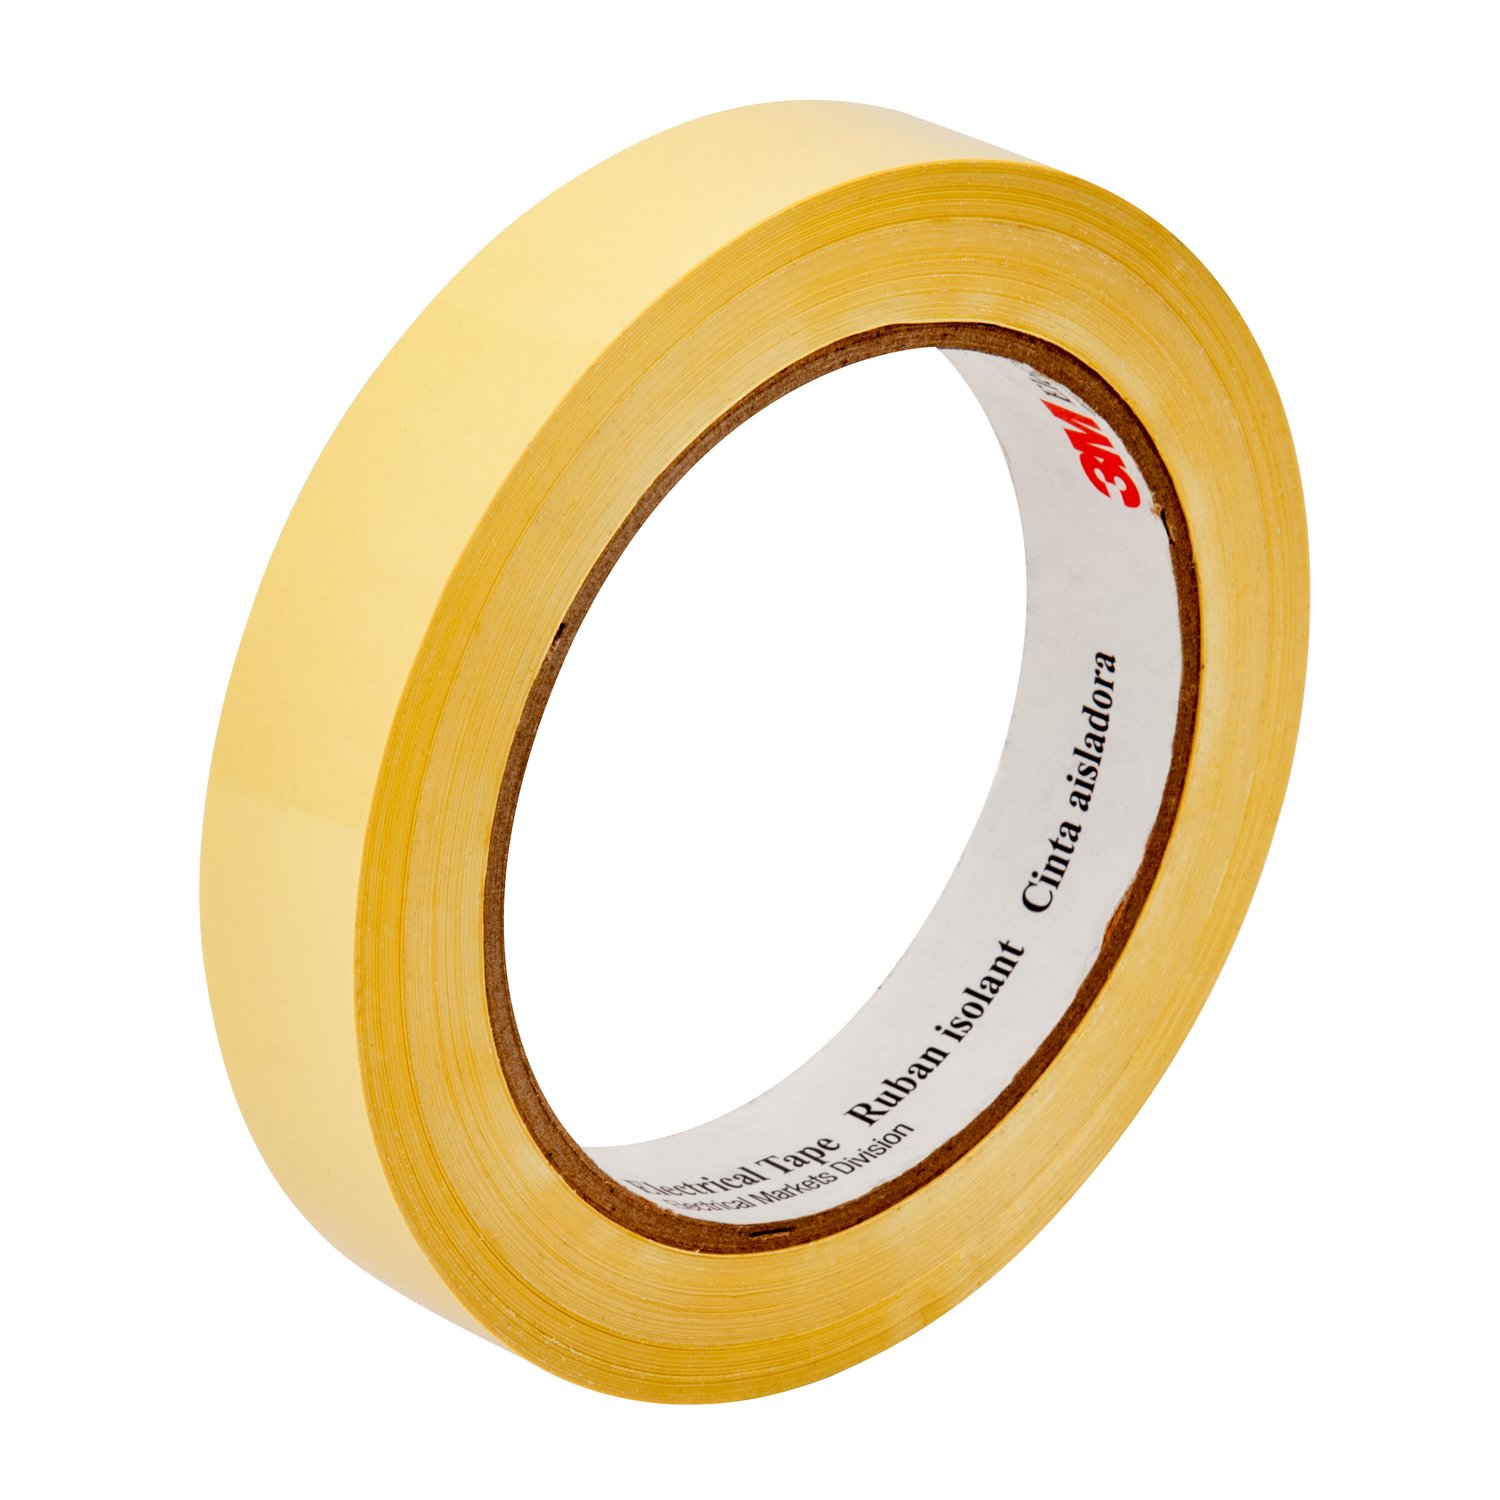 7010045351 - 3M Polyester Film Electrical Tape 56, 1/8 in x 72 yds, yellow, on 3-in
plastic core, Bulk (SLP), 288 Rolls/Case